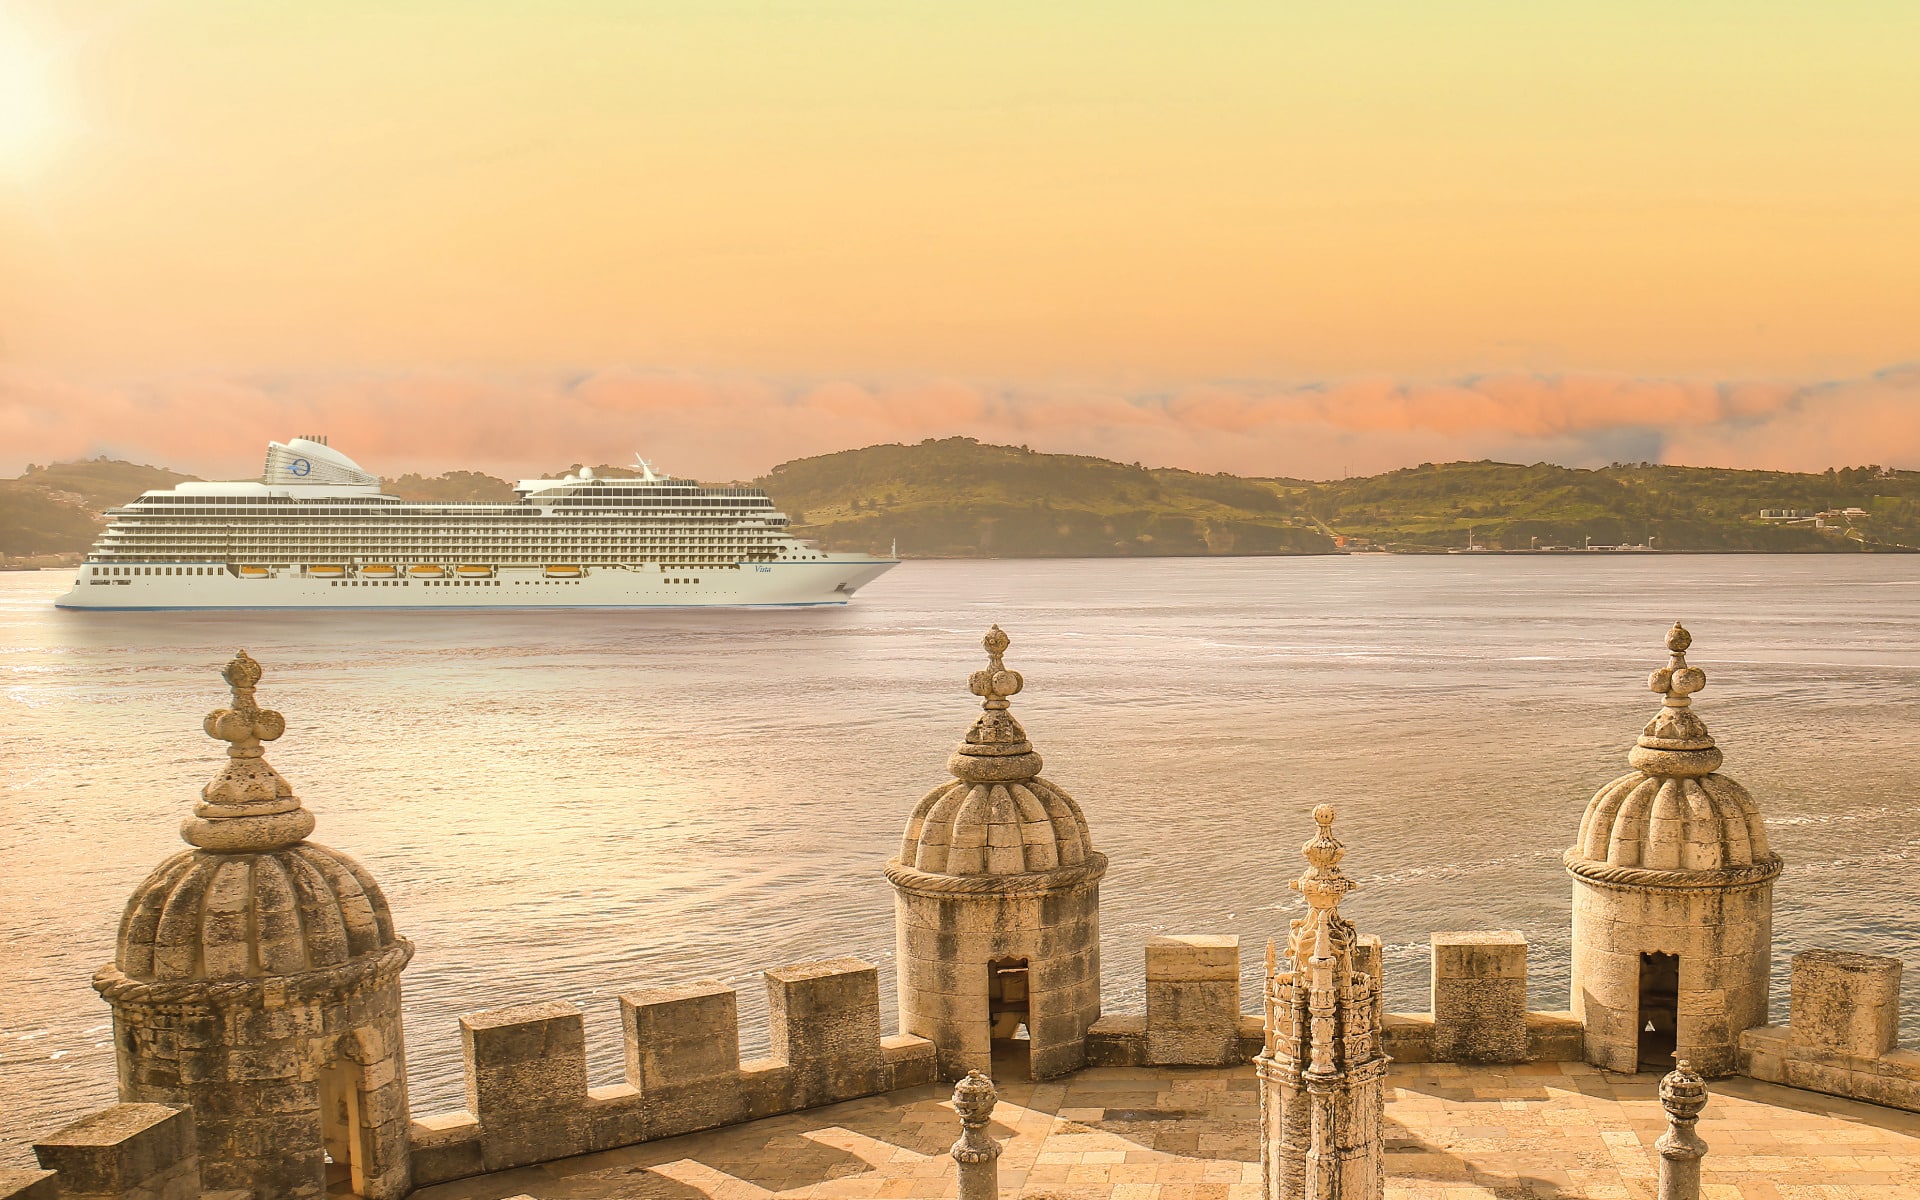 Rendering of Oceania Cruises Vista in Lisbon Harbour. The ships debut has been brought forward.